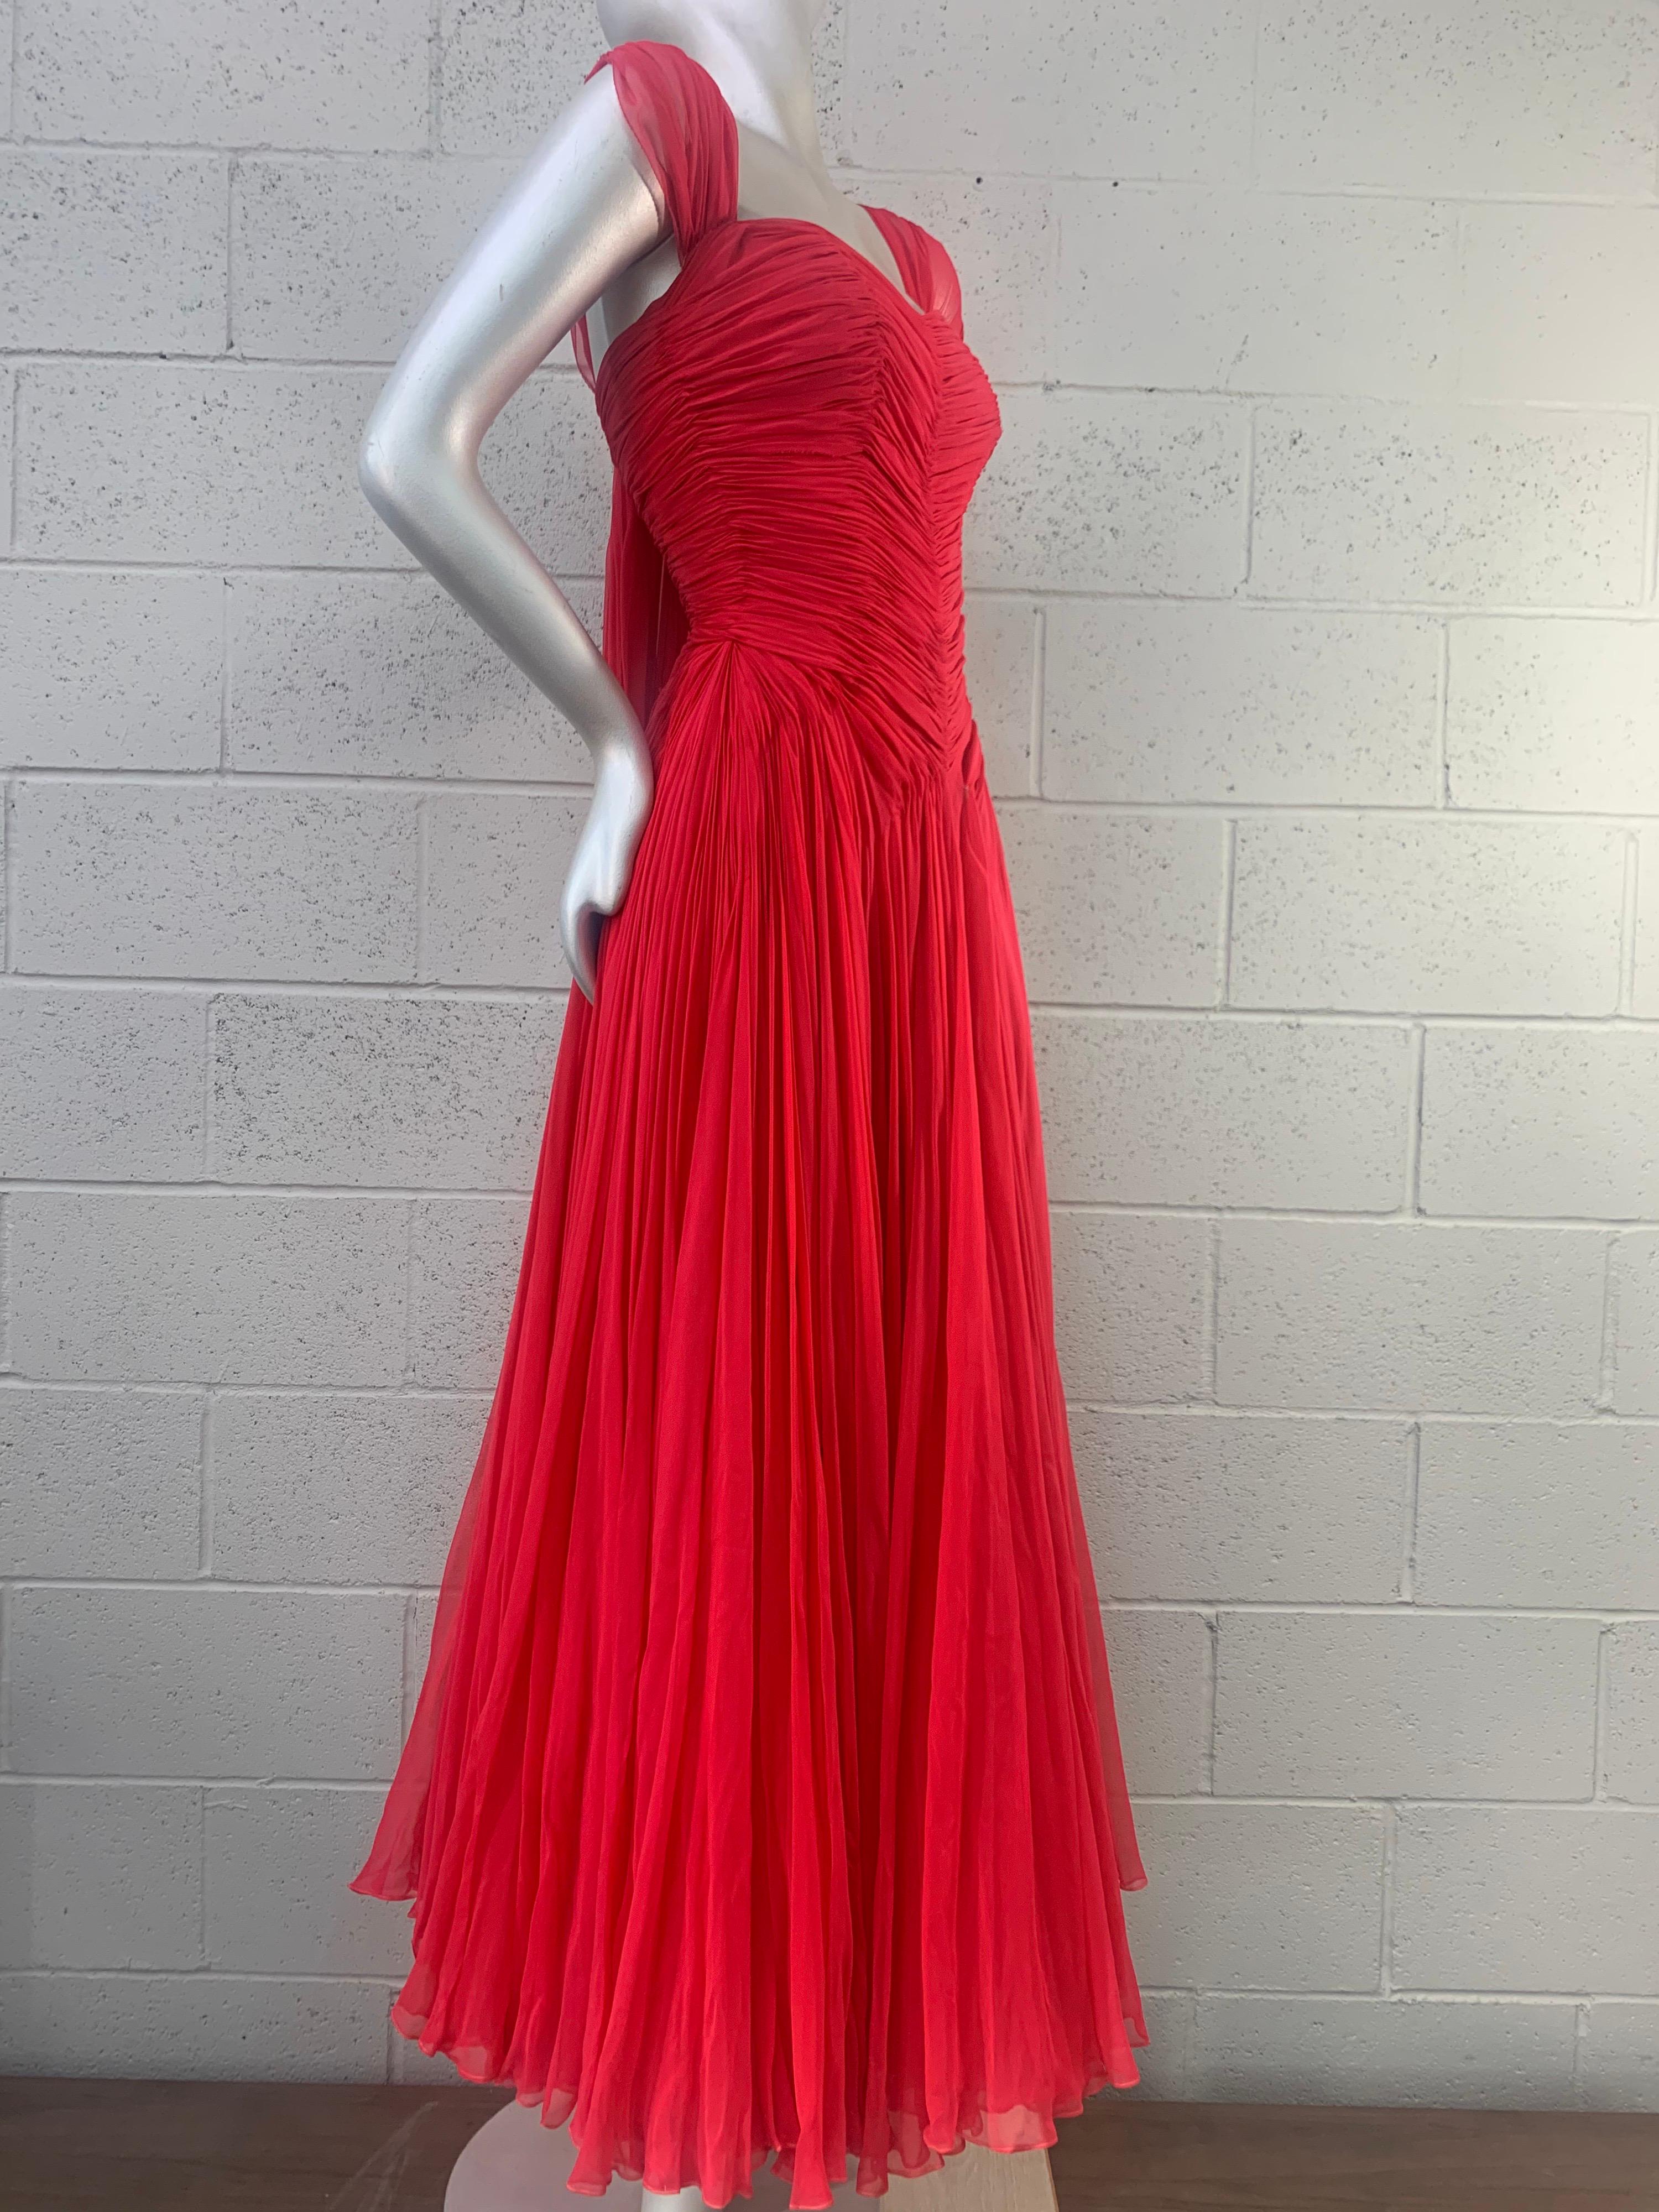 1960s Nanty - Paris Red Silk Chiffon Goddess Gown a la Jean Desses: Nanty was an elite New York label that adapted French haute couture designs for American clients. This design features boned and structured bodice, ruched and gathered symmetrical